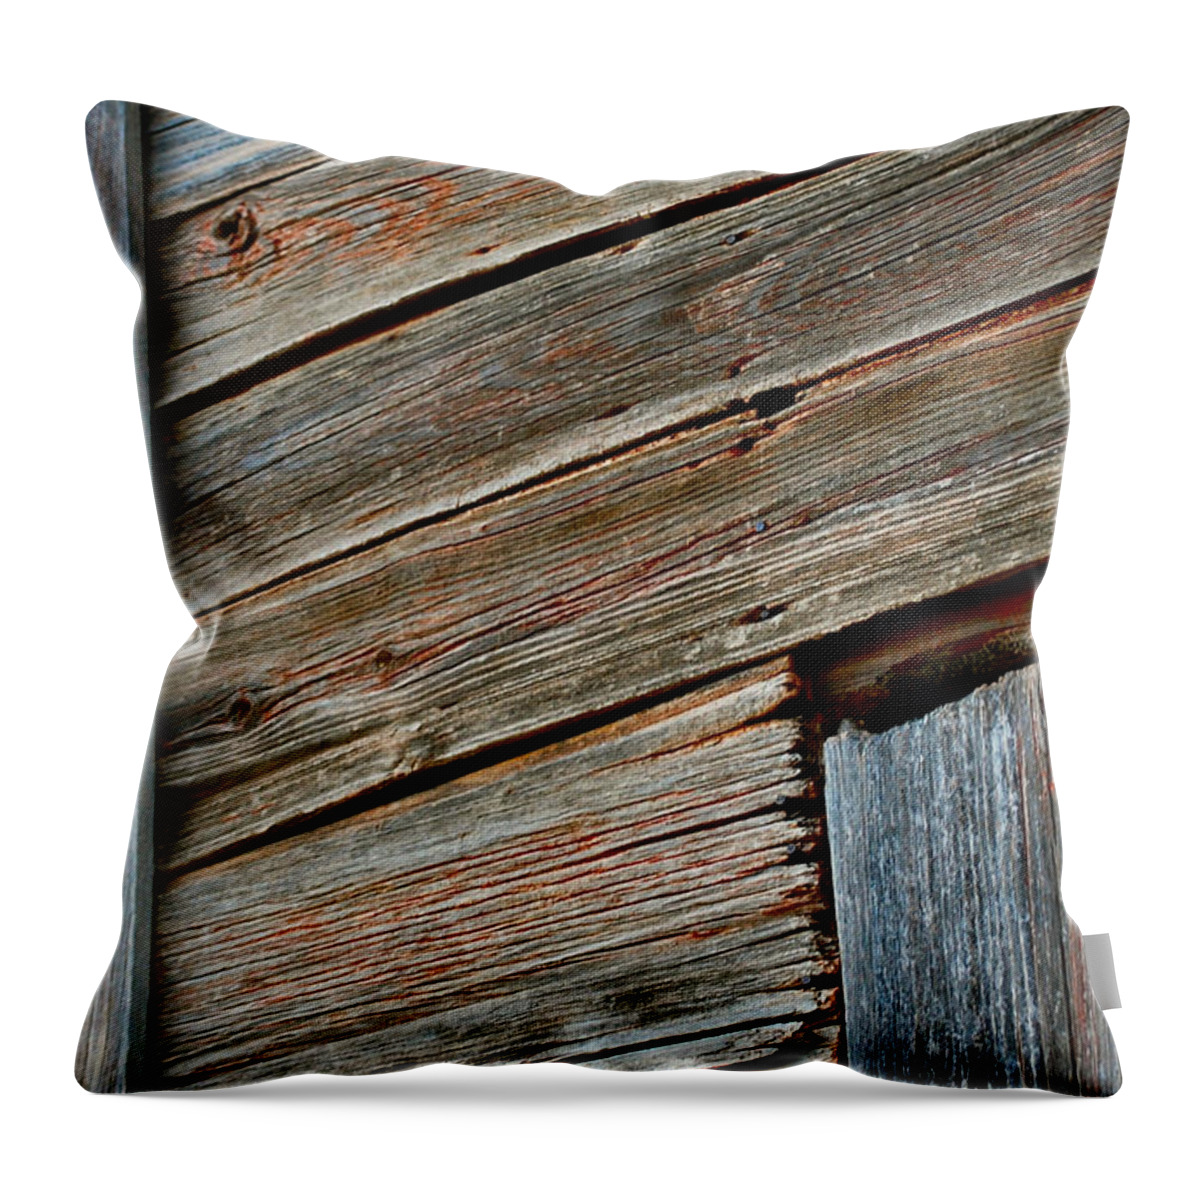 Barn Throw Pillow featuring the photograph Ol' Red by Anjanette Douglas